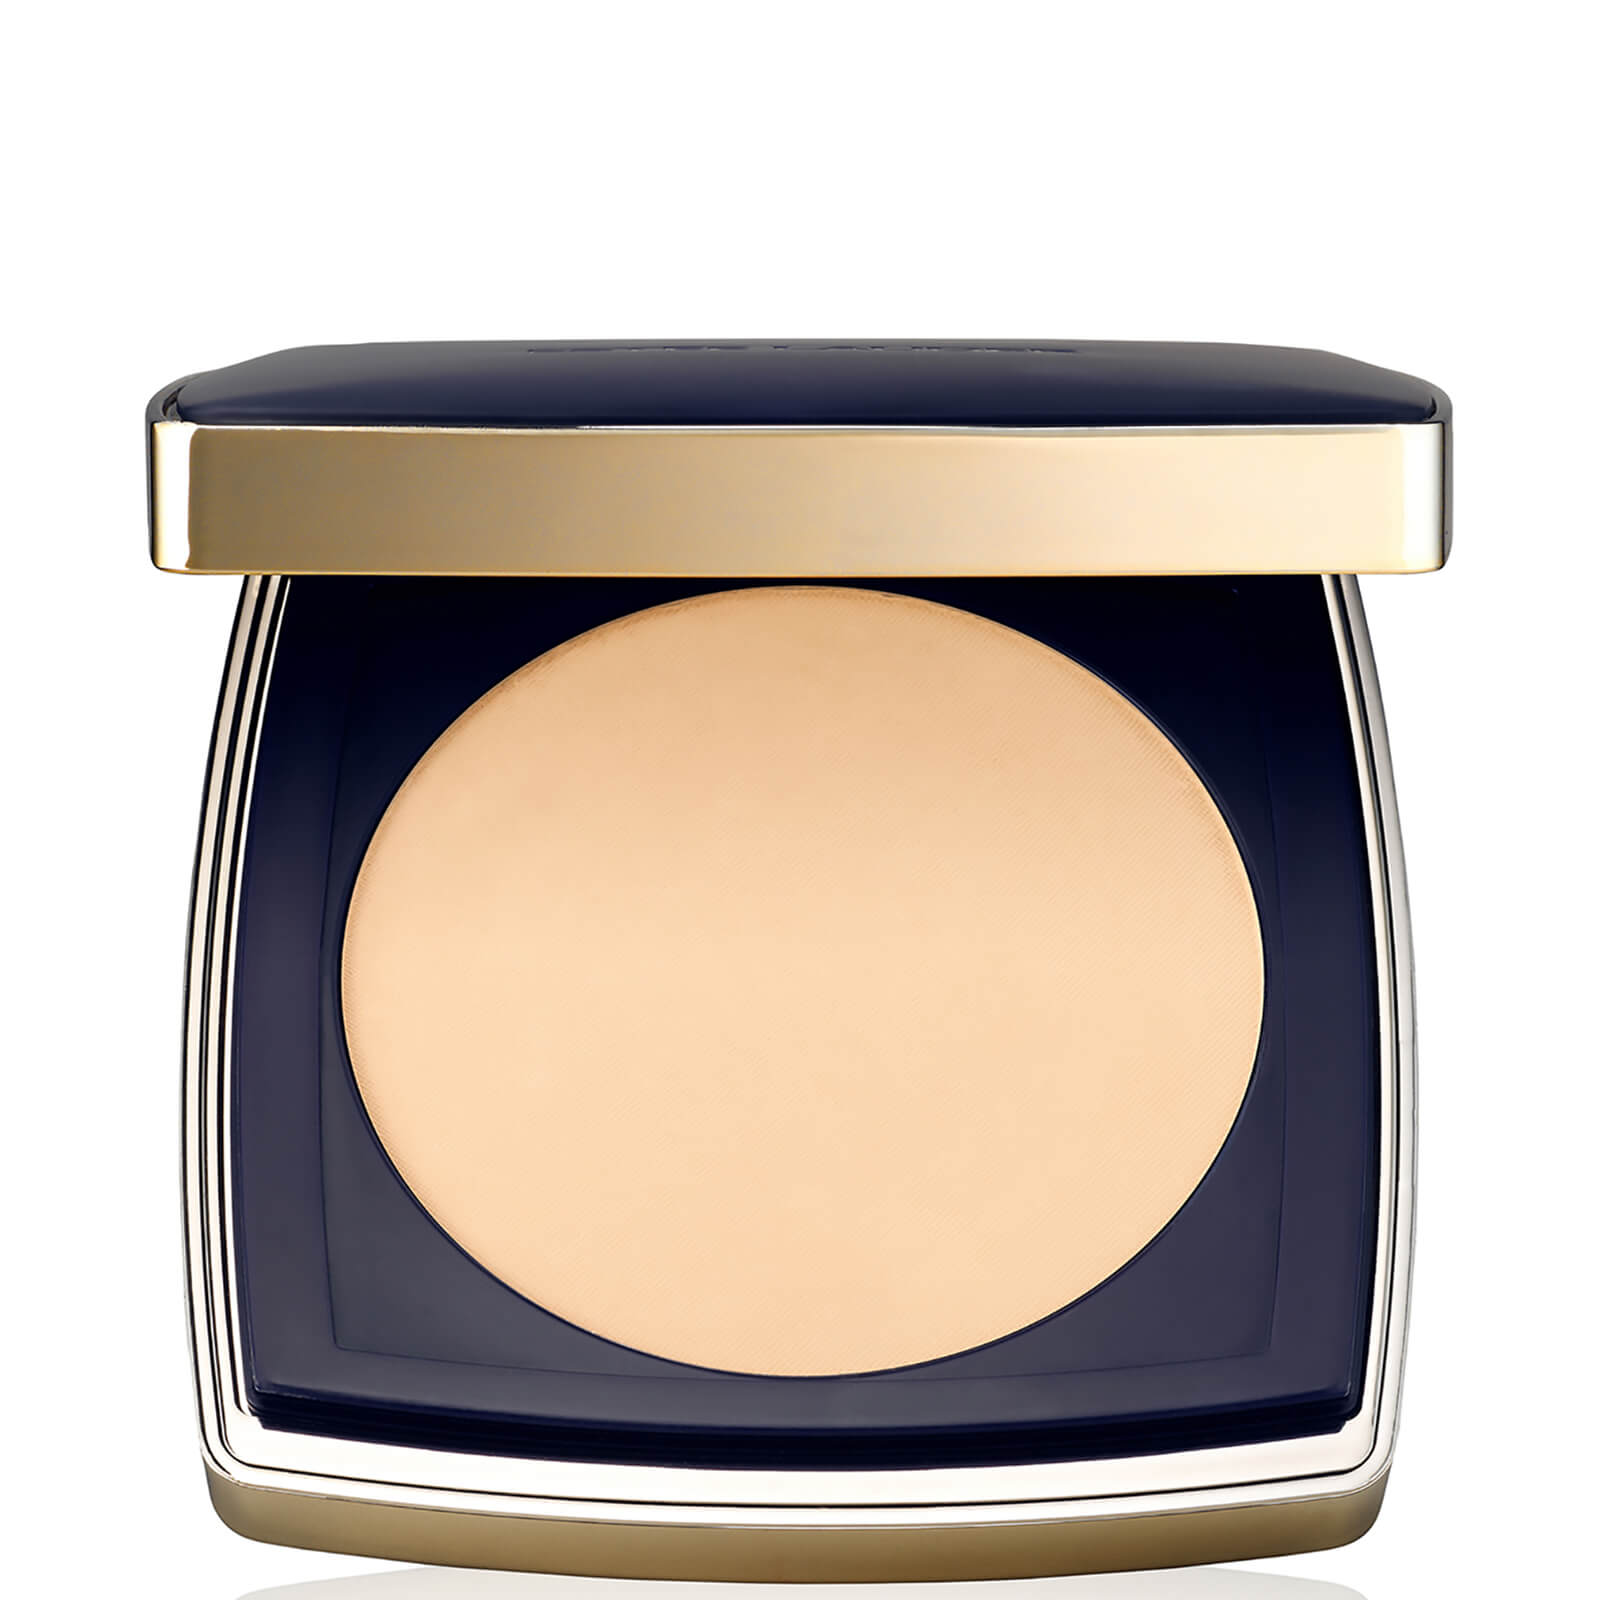 Estee Lauder Double Wear Stay-in-Place Matte Powder Foundation SPF10 12g (Various Shades) - 2C1 Pure